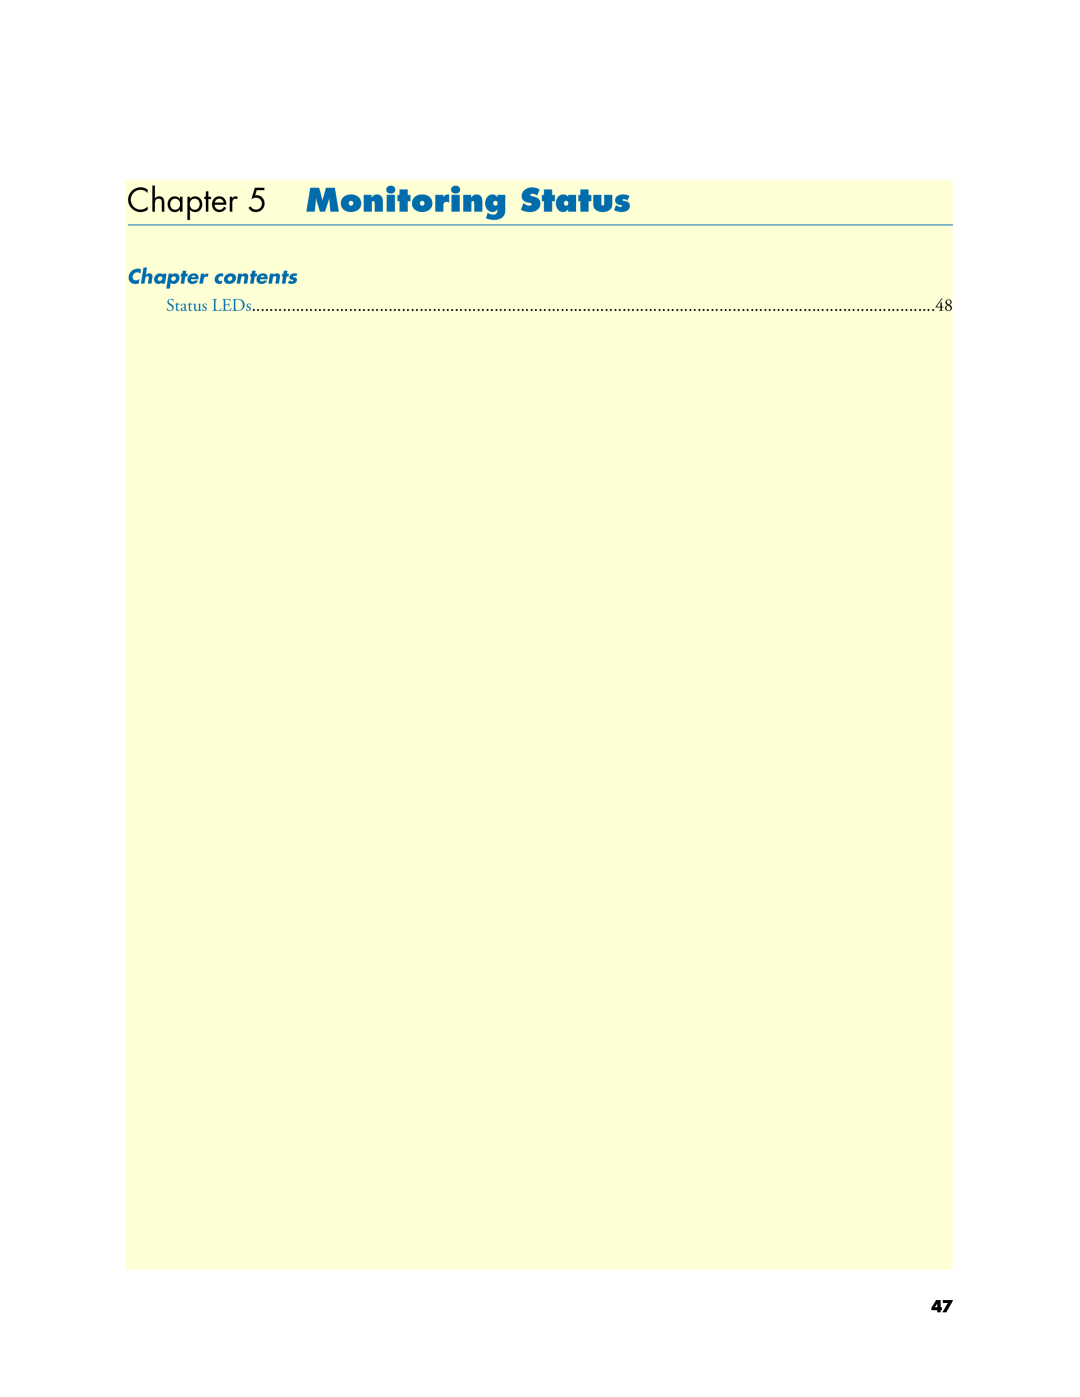 Patton electronic 4110 manual Monitoring Status, Chapter contents 